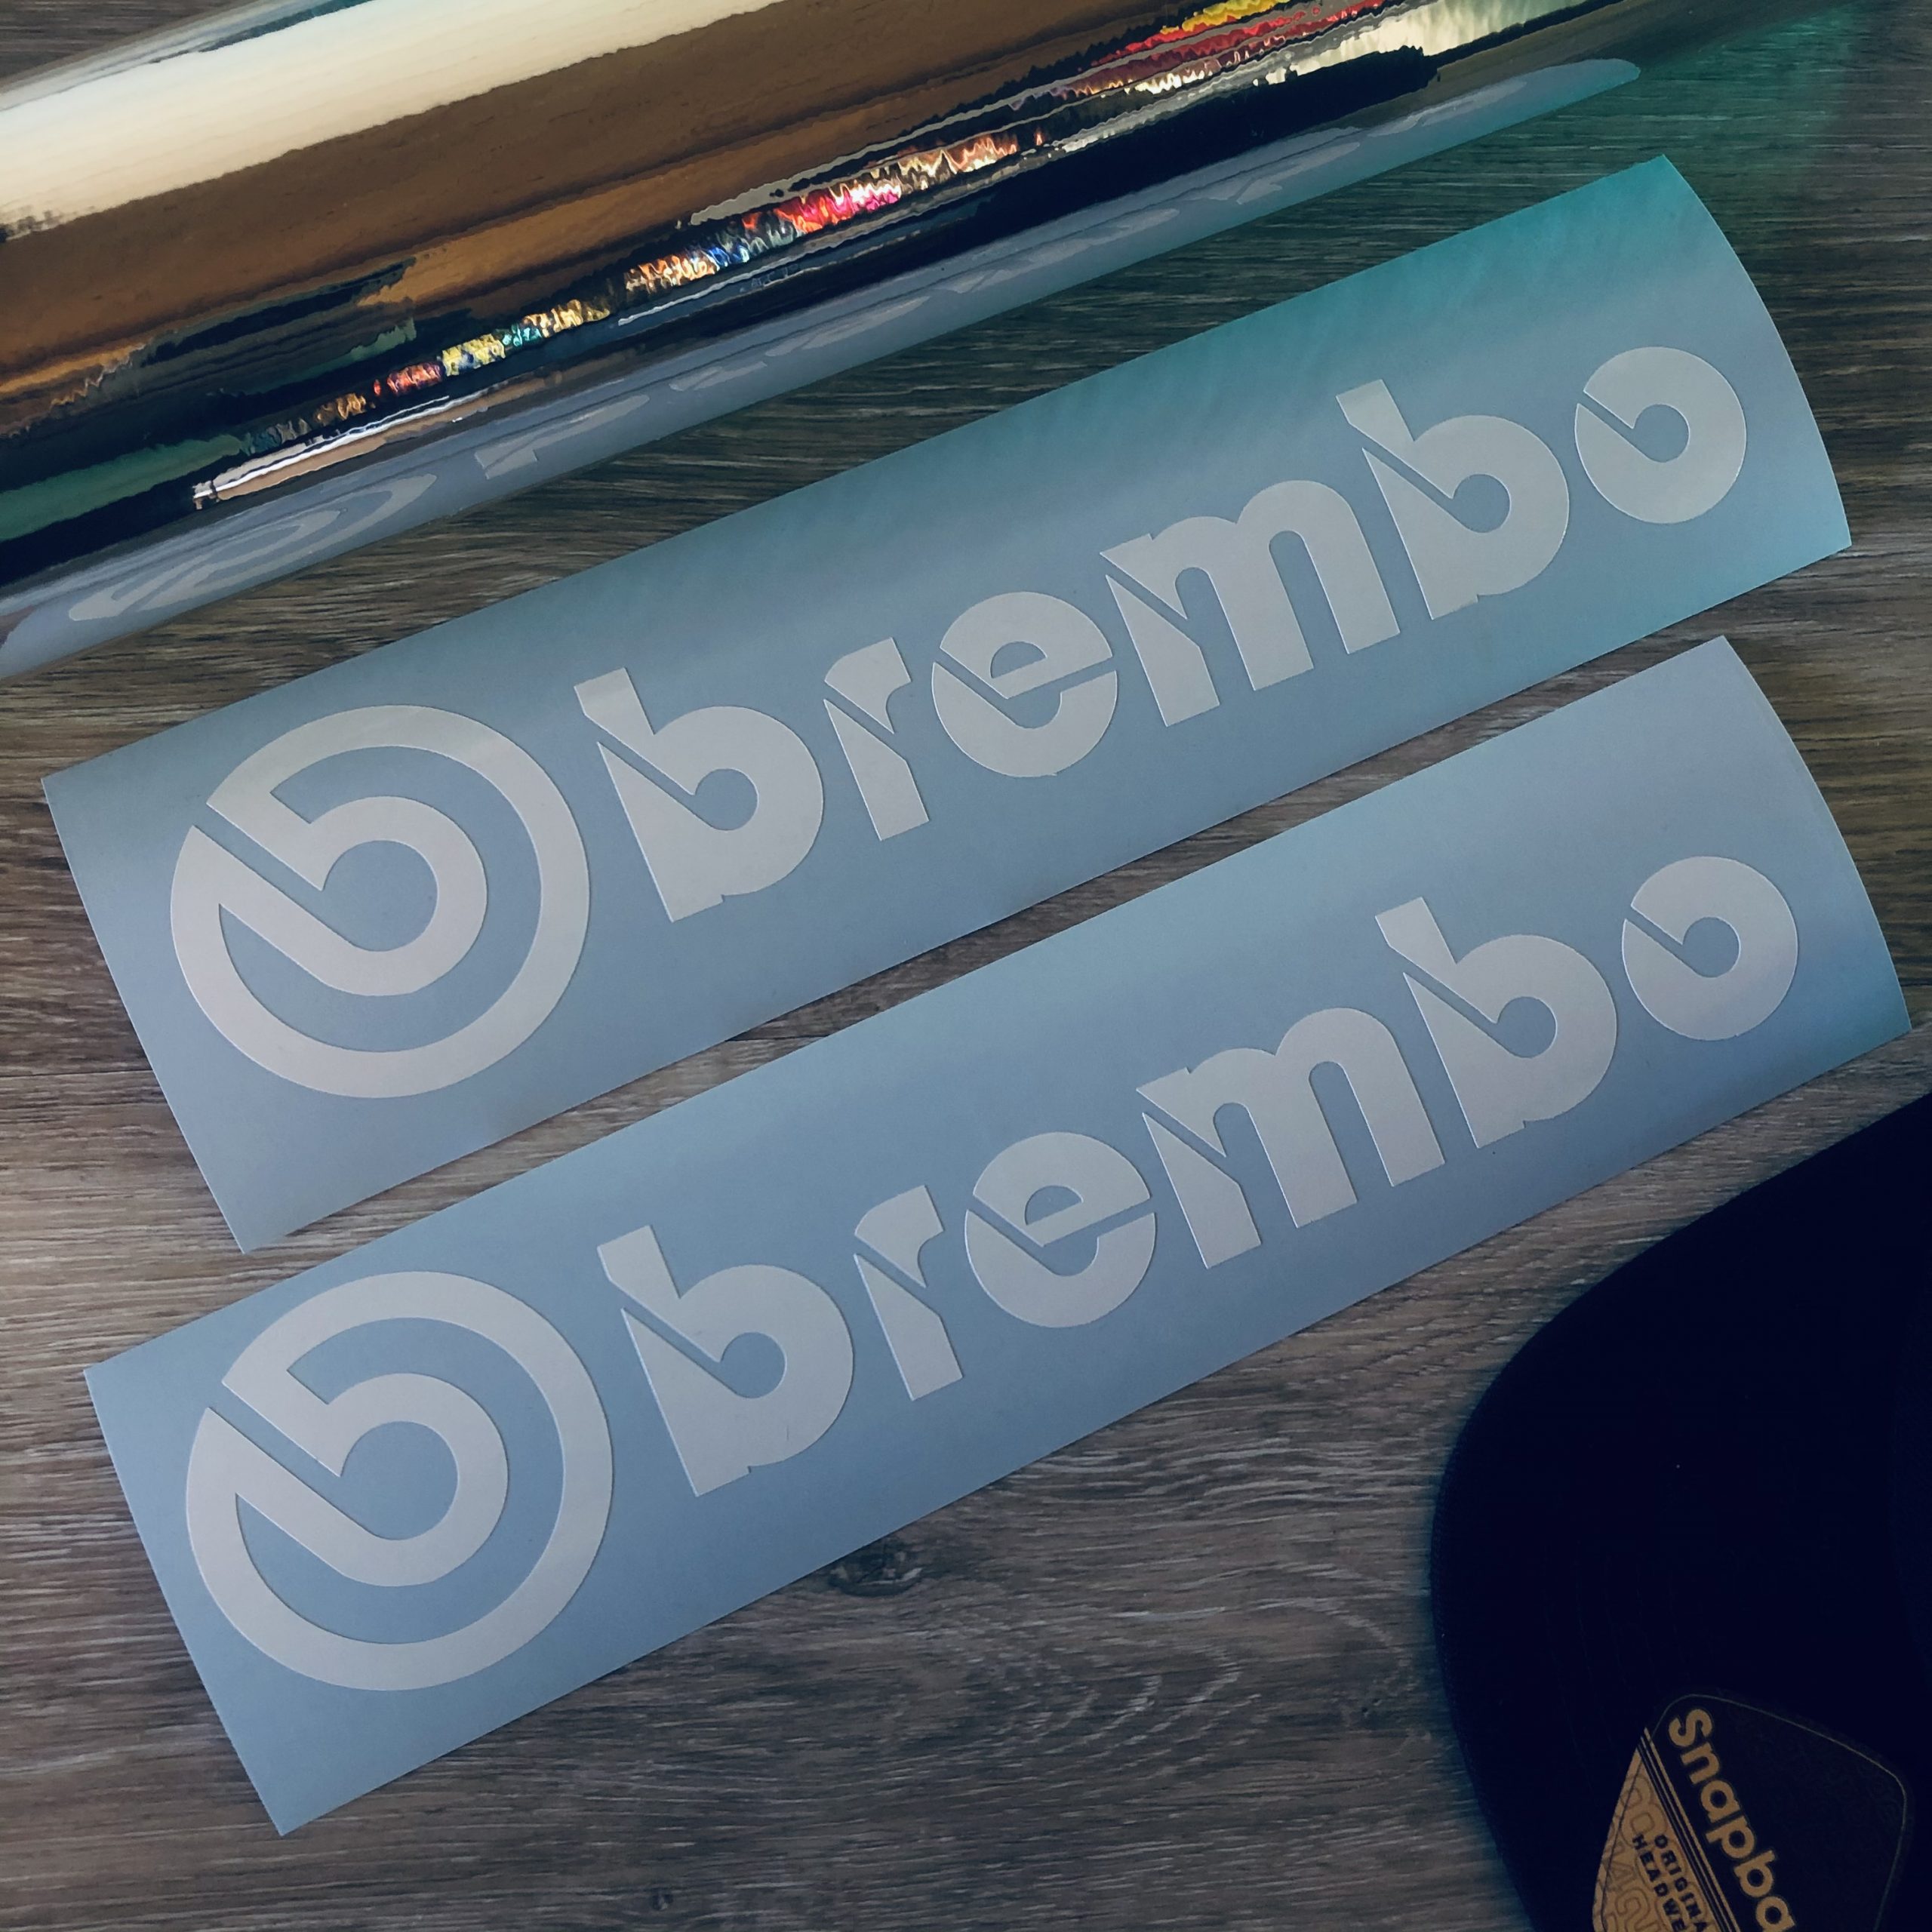 Brembo Disc Stickers for Sale